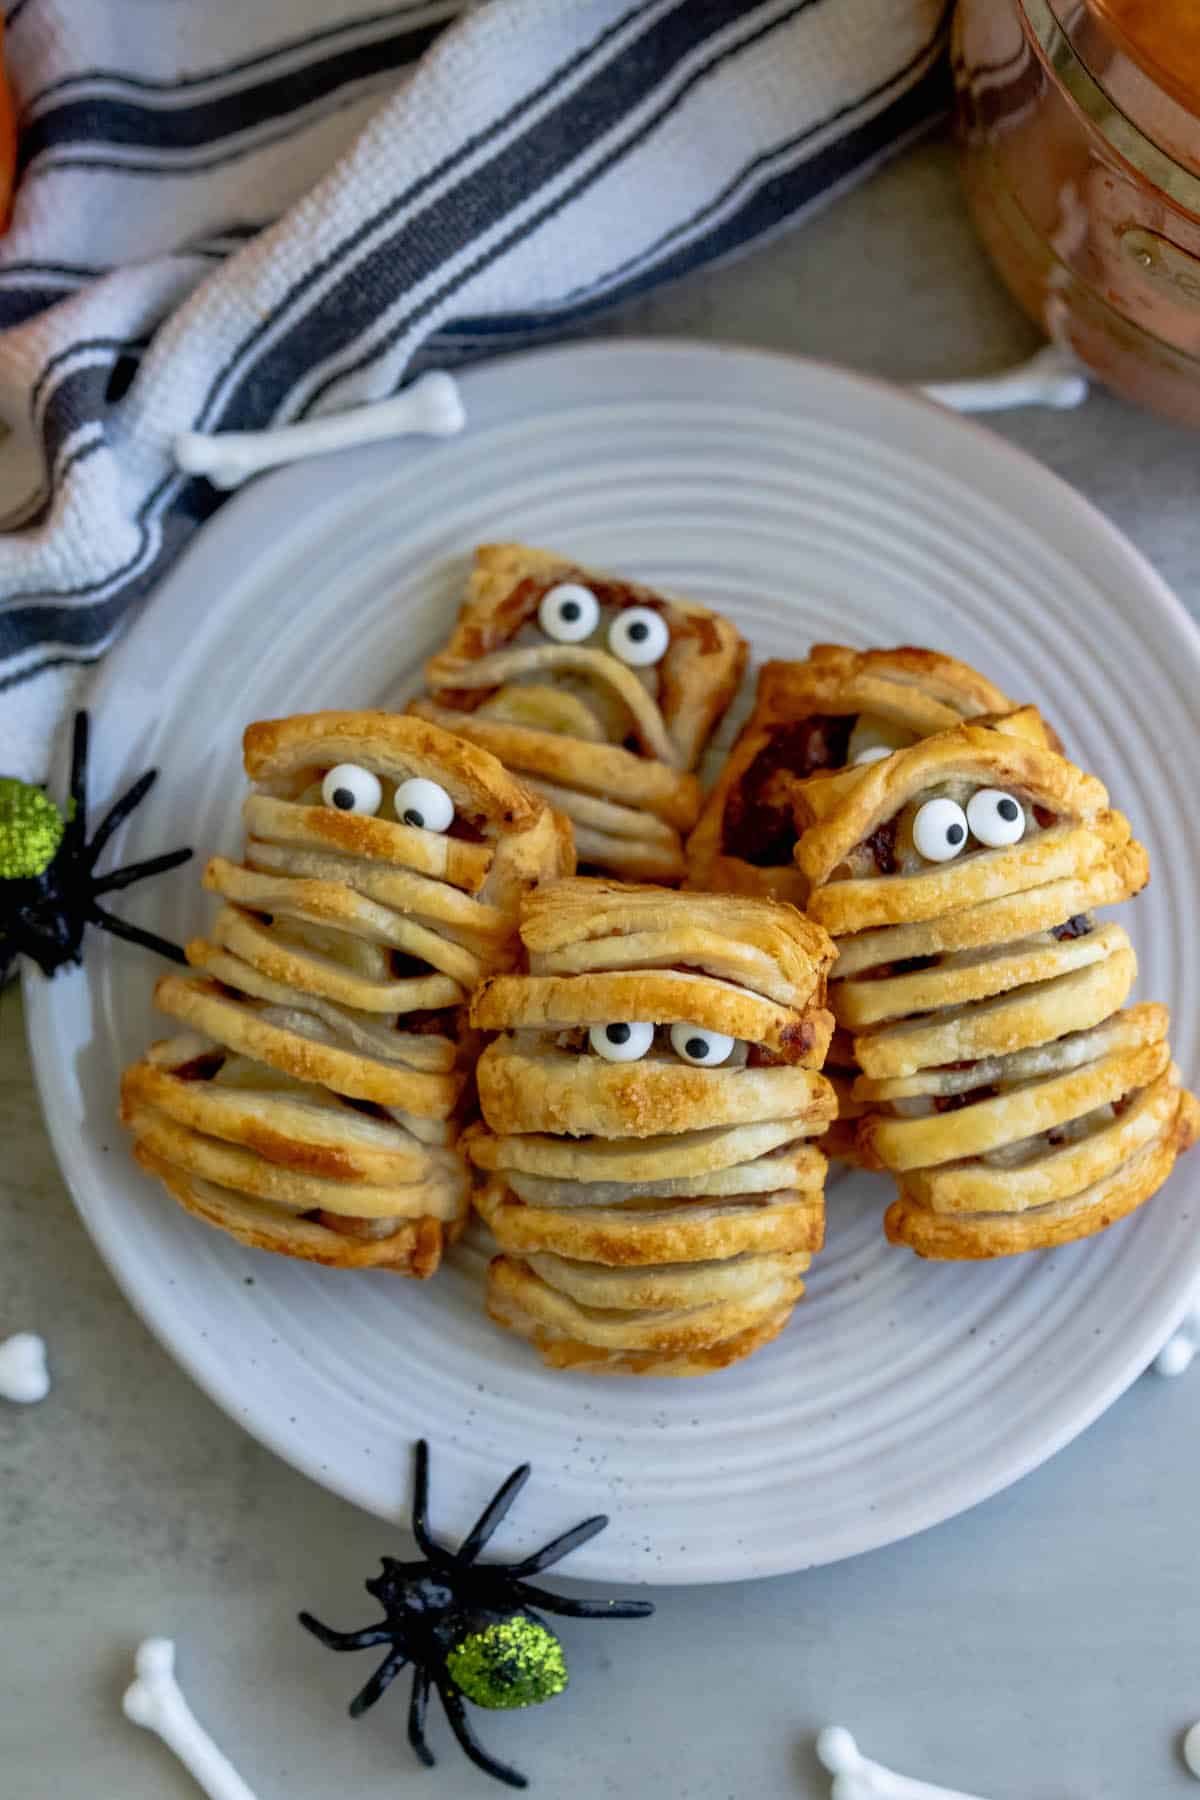 Banana Nutella mummies on a plate with pumpkins and spiders.